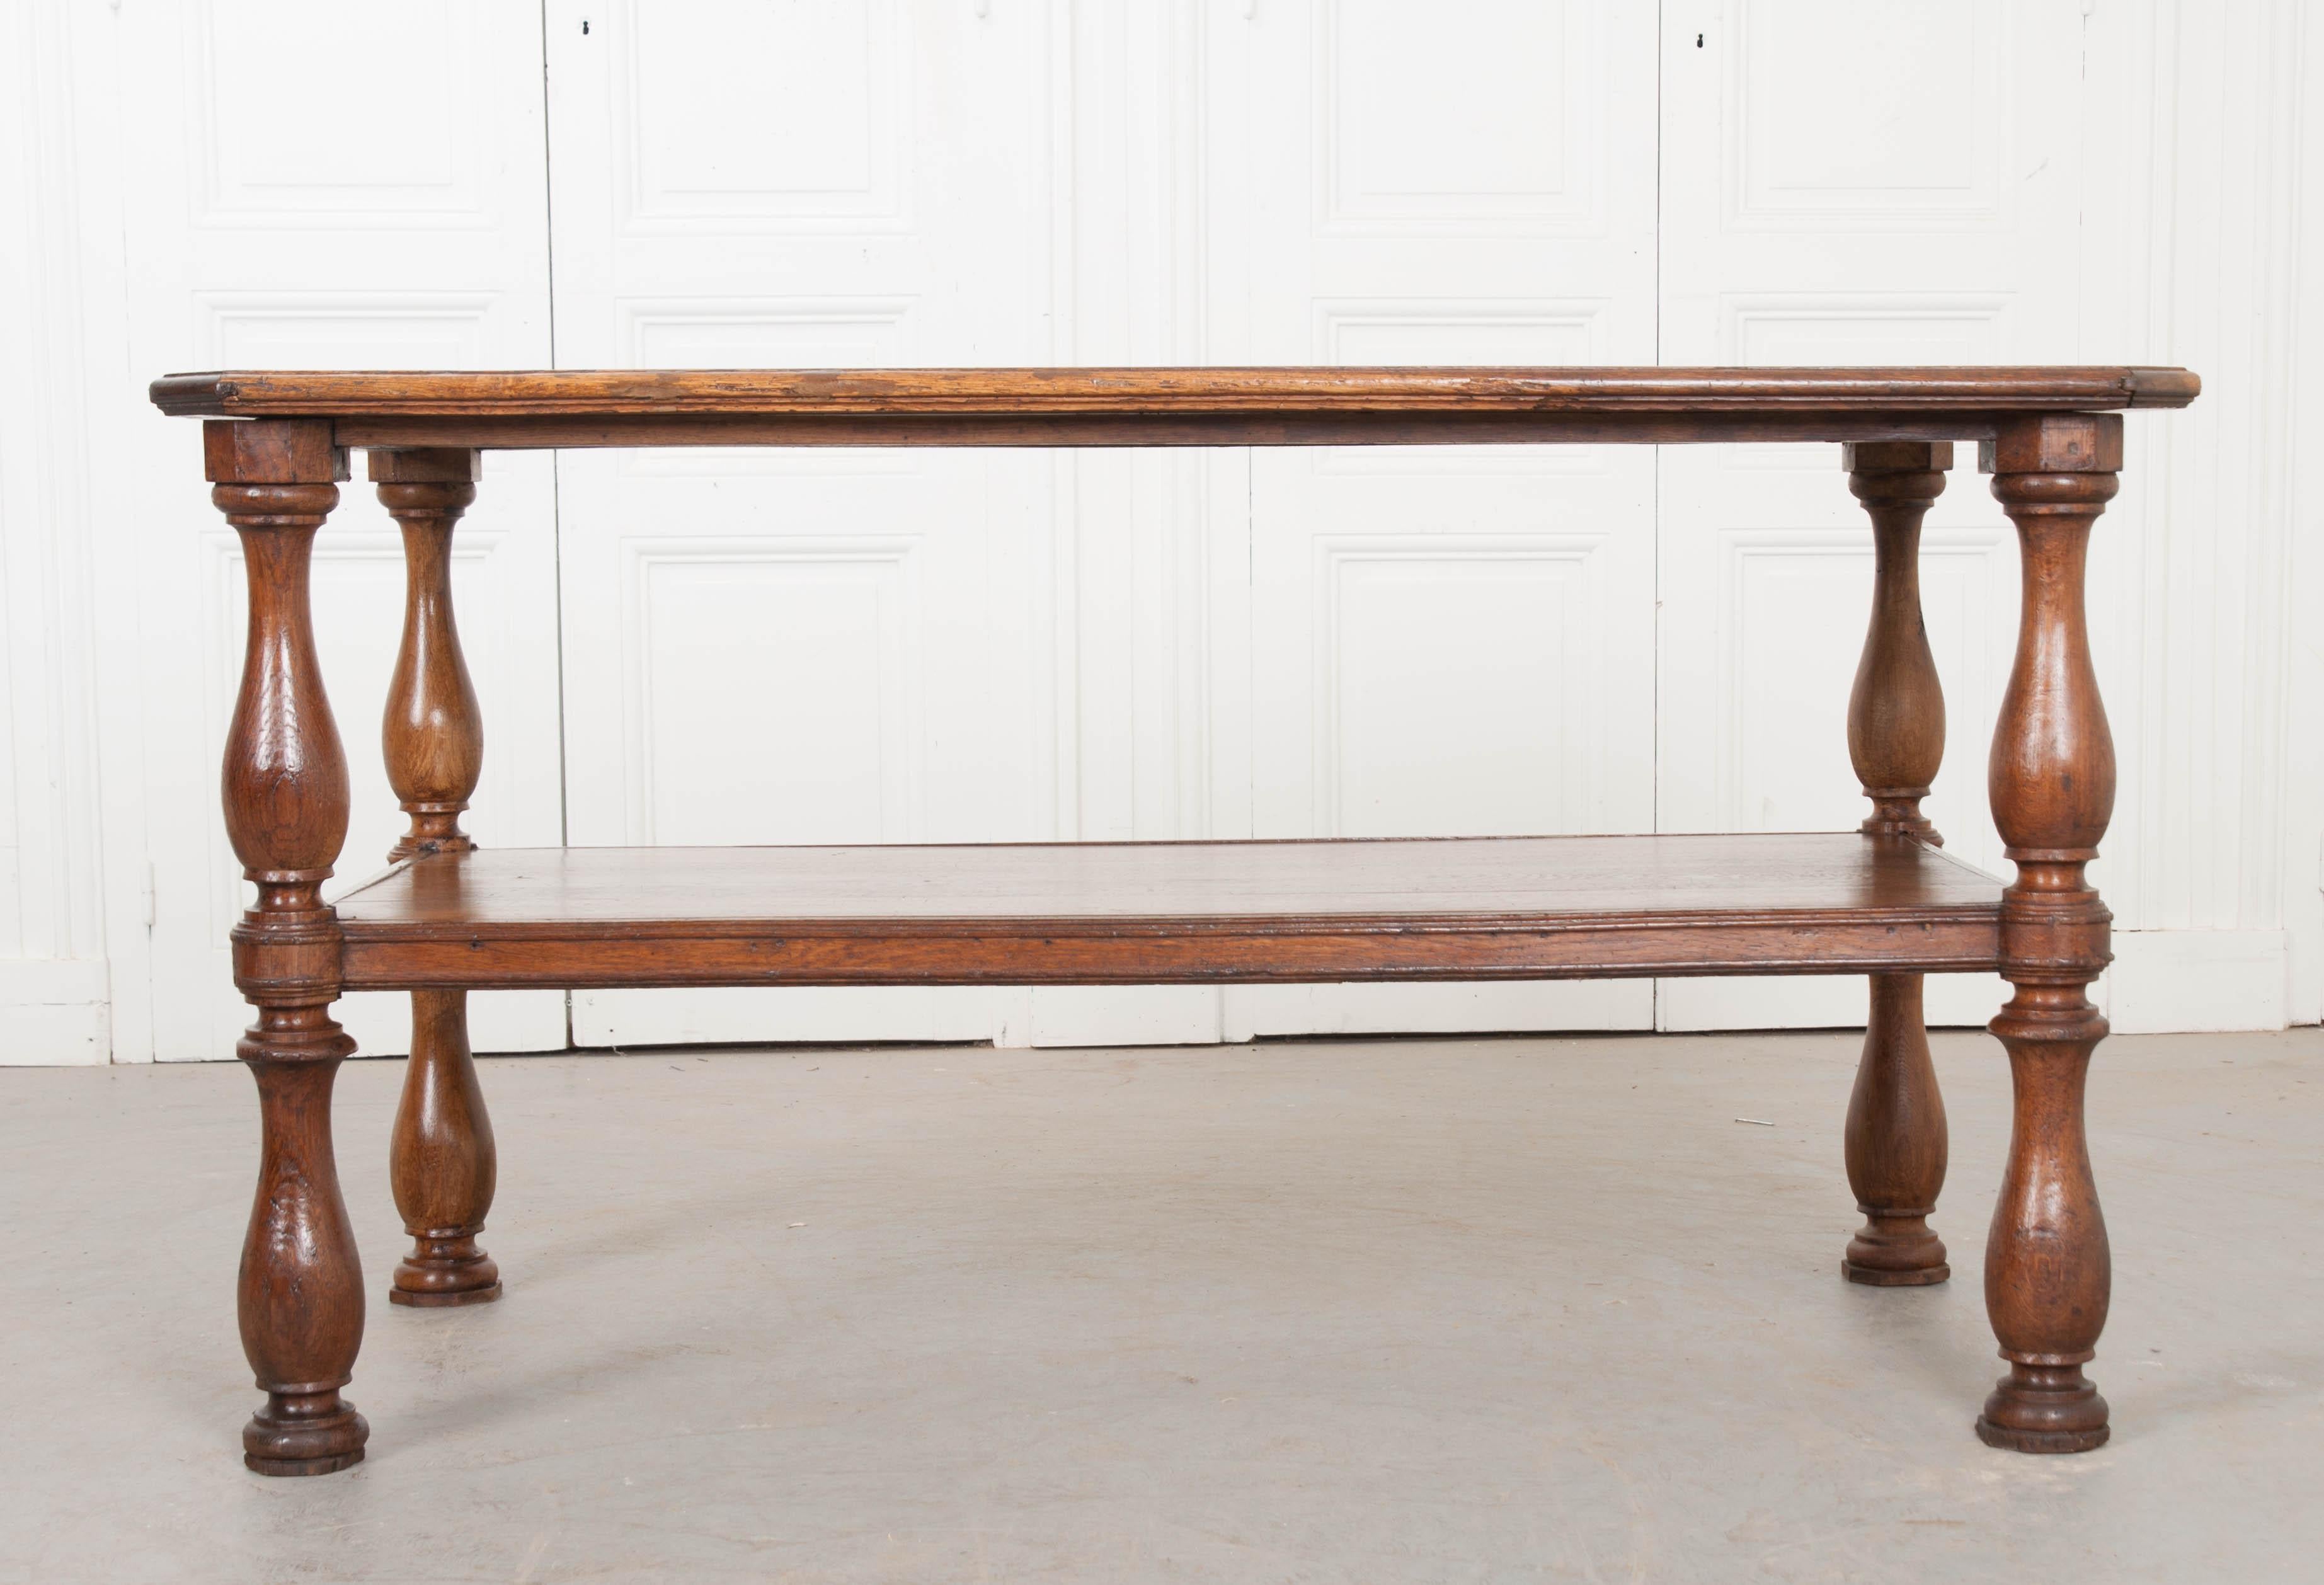 Beautiful, quarter sawn graining enrich the already lustrous oak surface of this amazing French drapers table. Originally used by tailors and seamstresses, these lengthy tables would provide a work surface long enough for yards of fabric to be laid